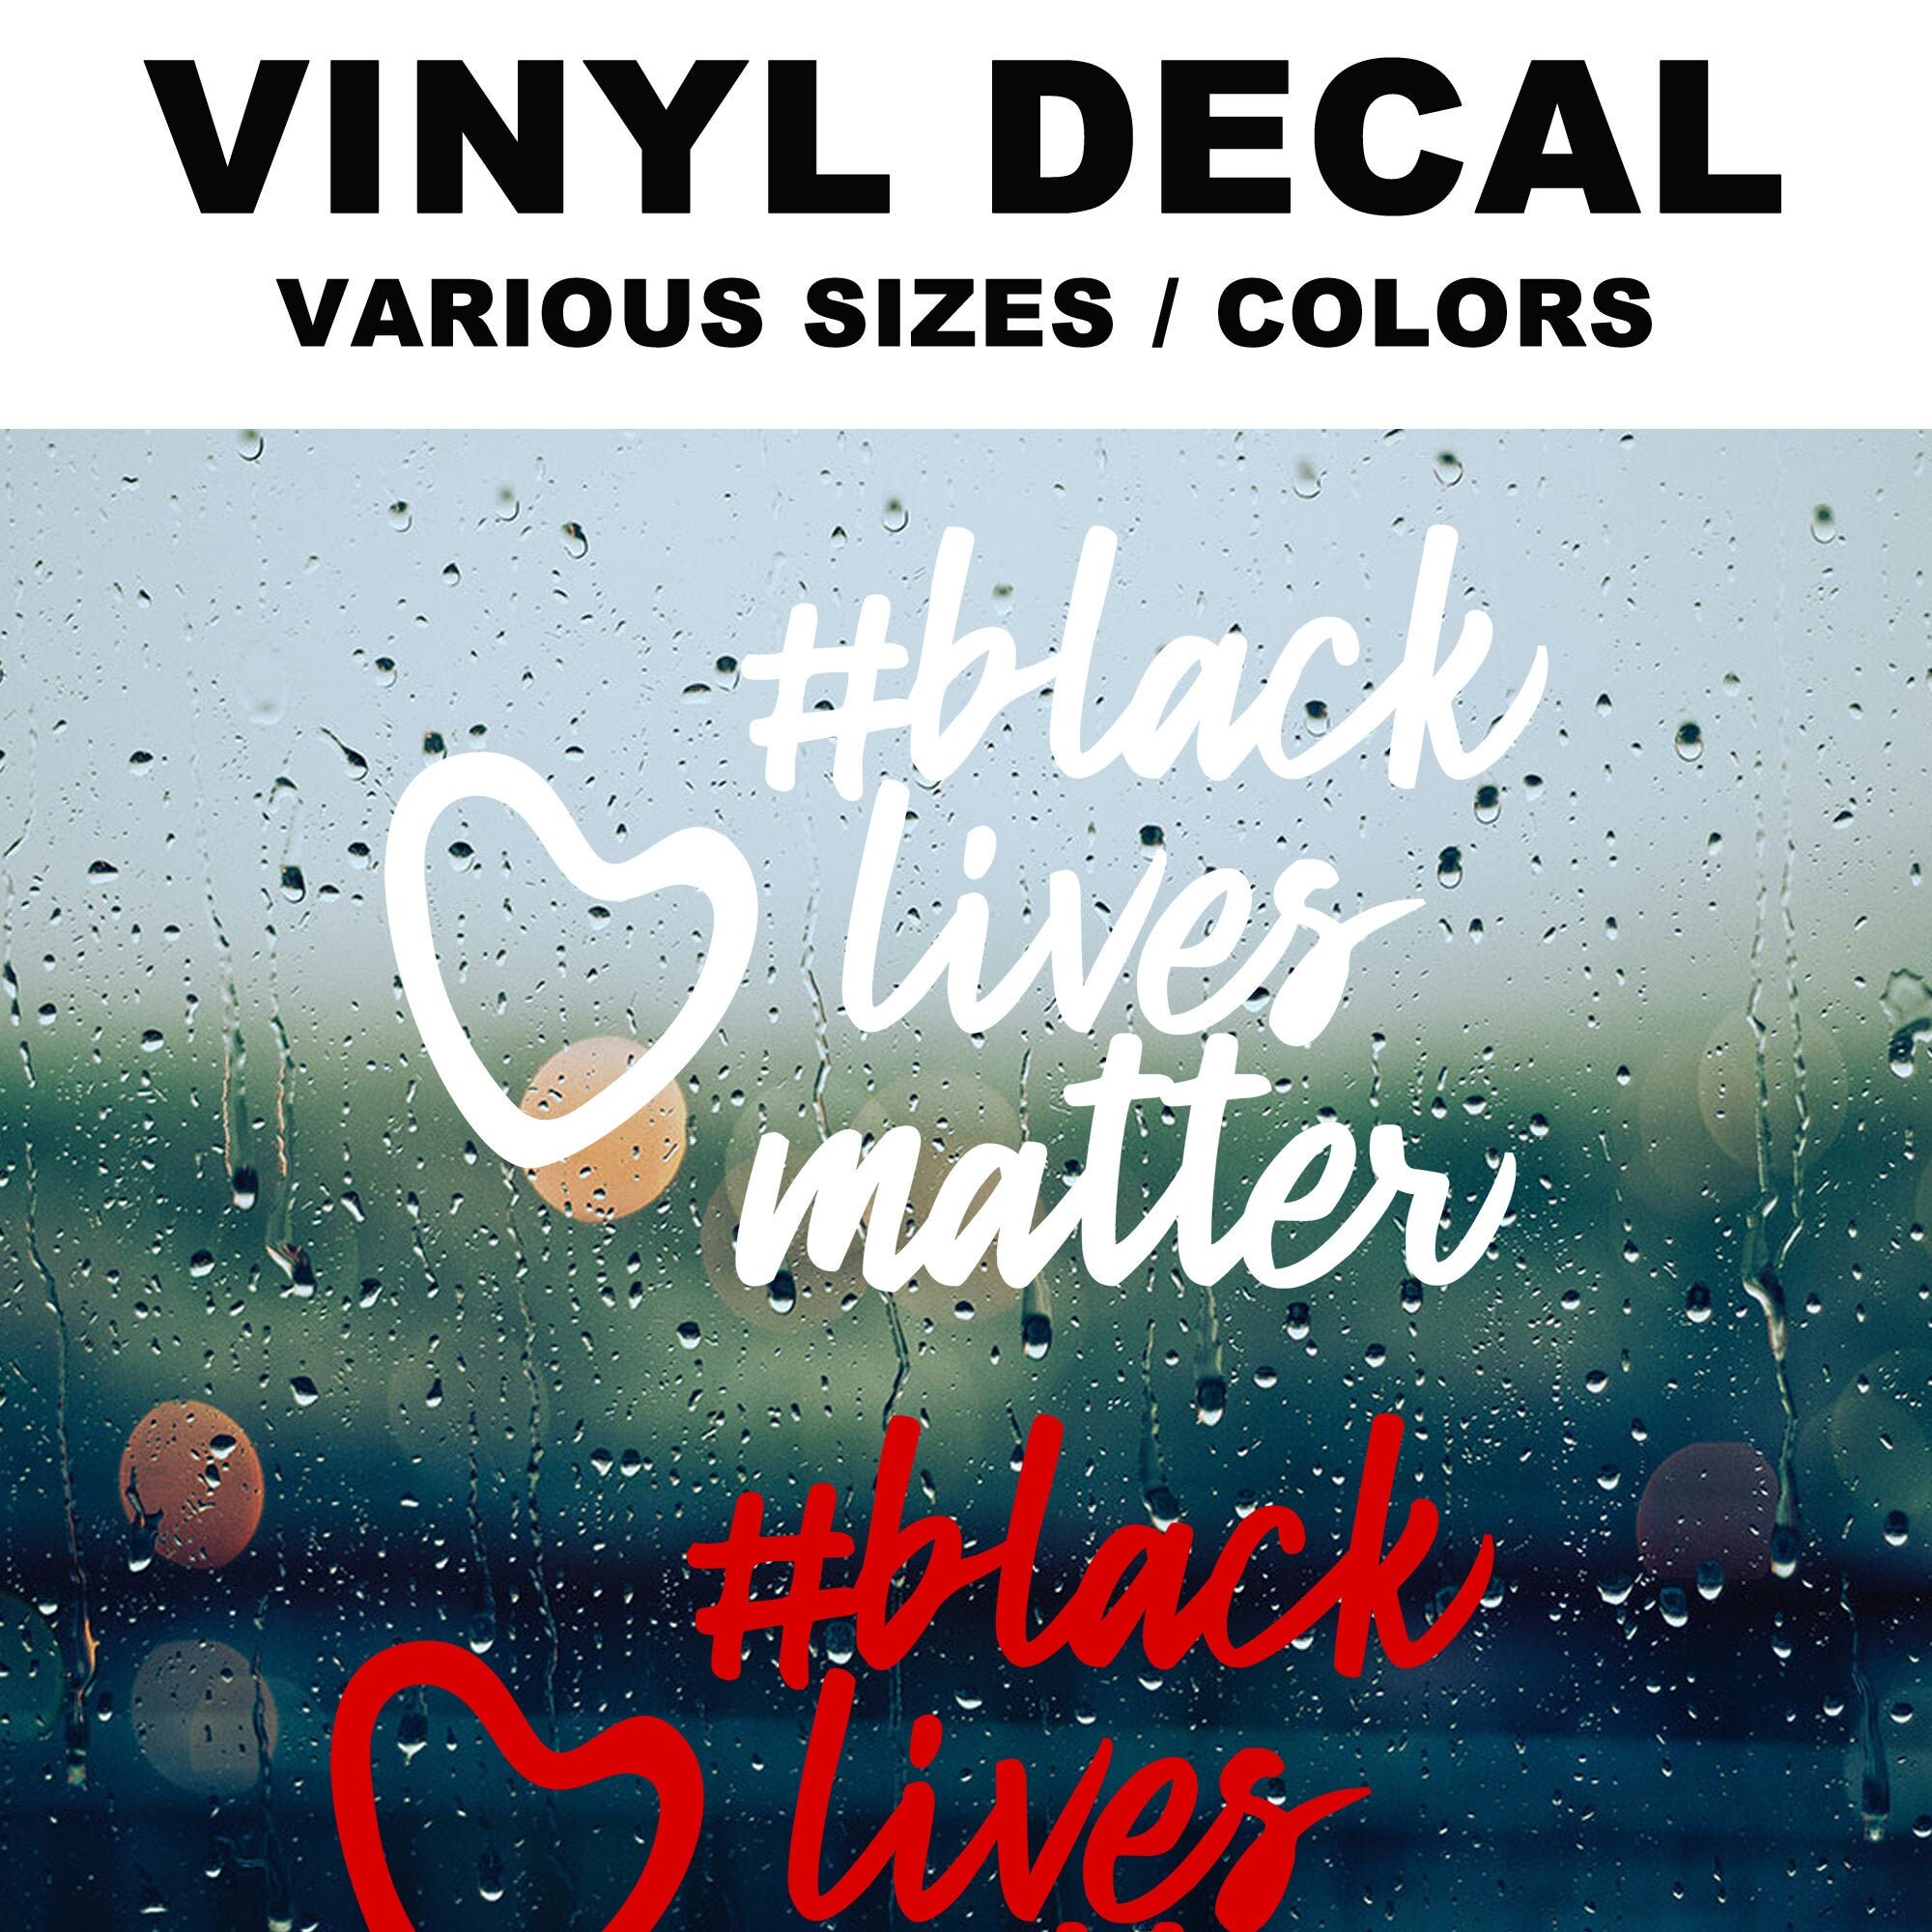 Black Lives Matter Decal Various Sizes and Colors Die Cut Vinyl Decal also in Cool Chrome Colors!